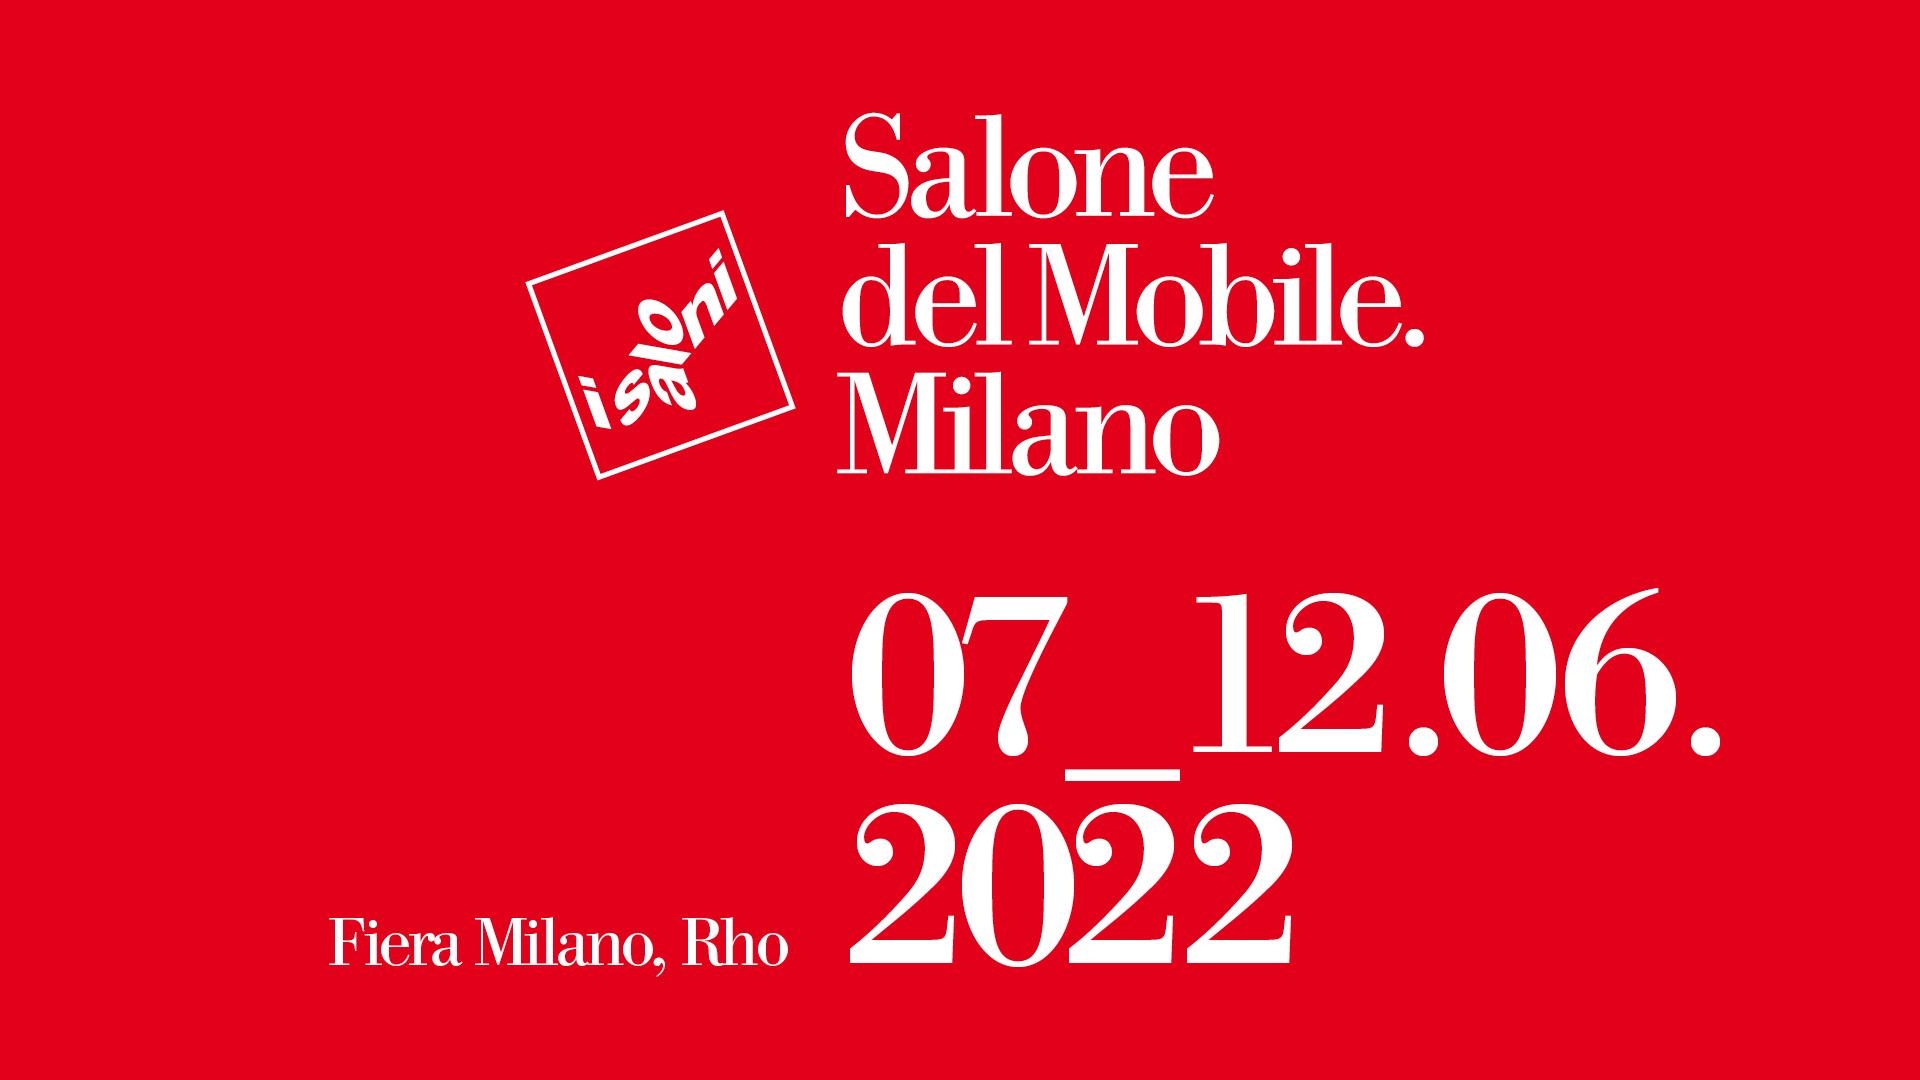 What is the Salone del Mobile?